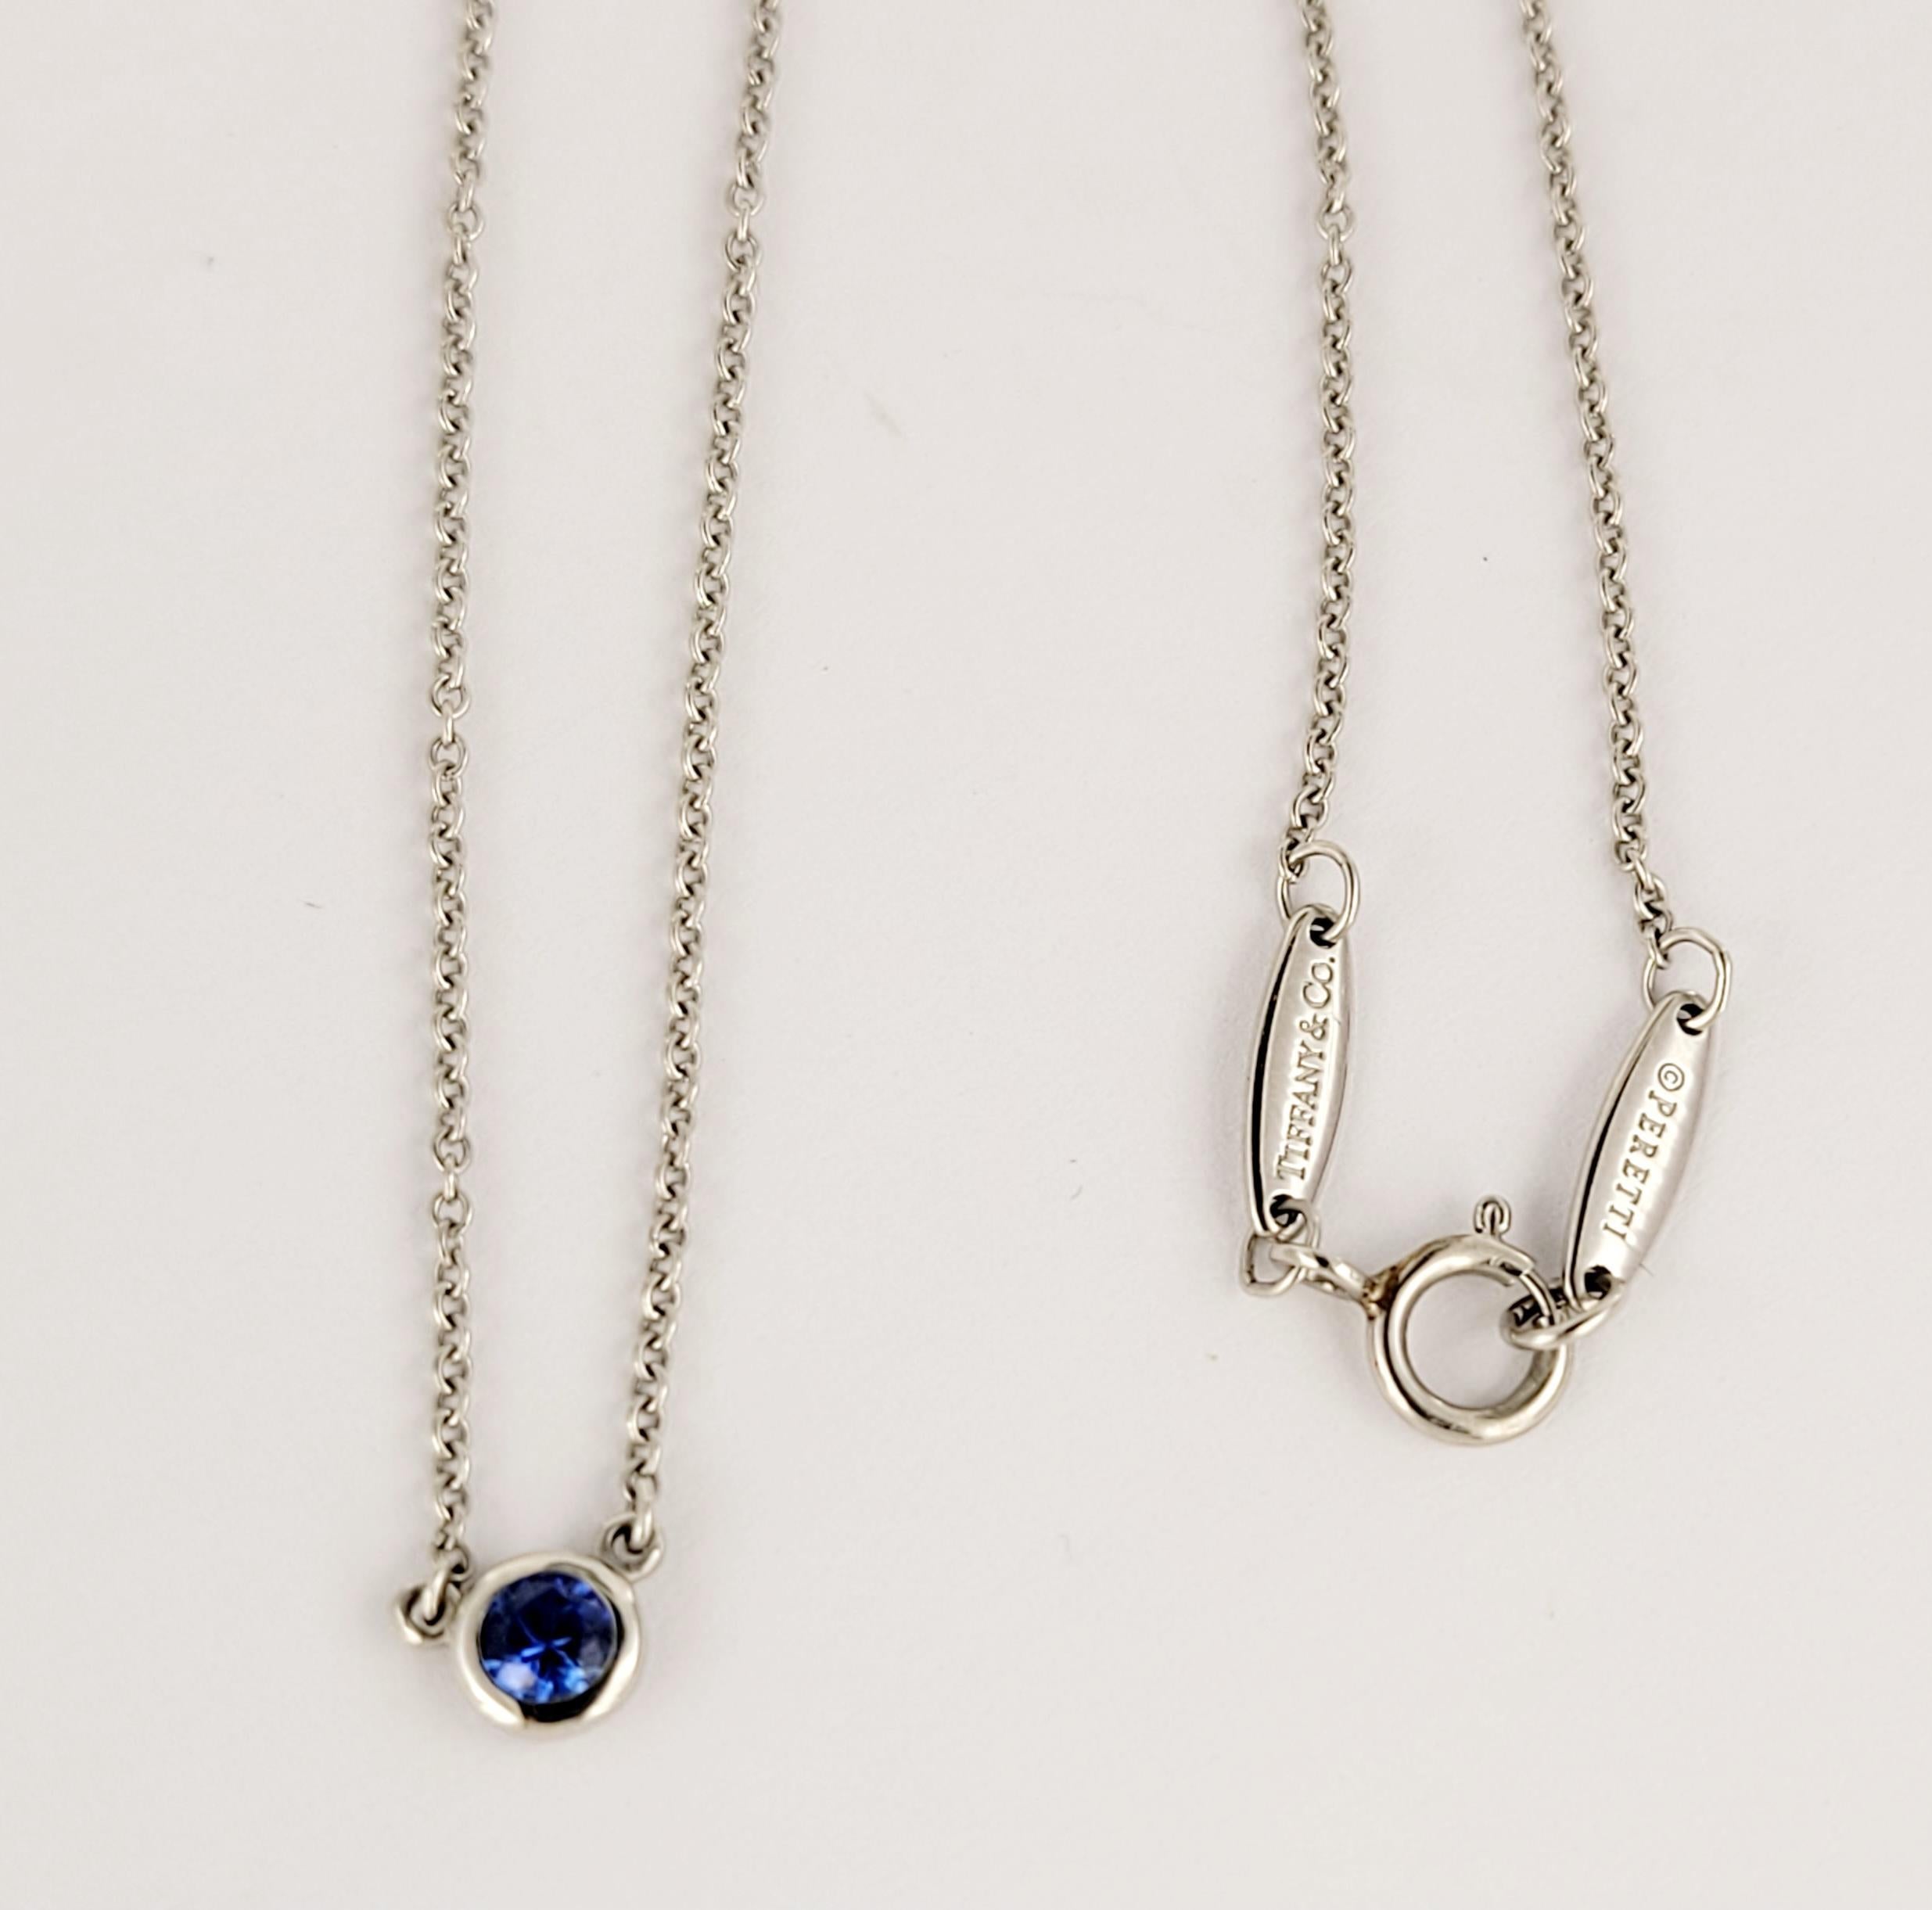 Round Cut Elsa Peretti Color by the Yard Pendant in Platinum with a Sapphire